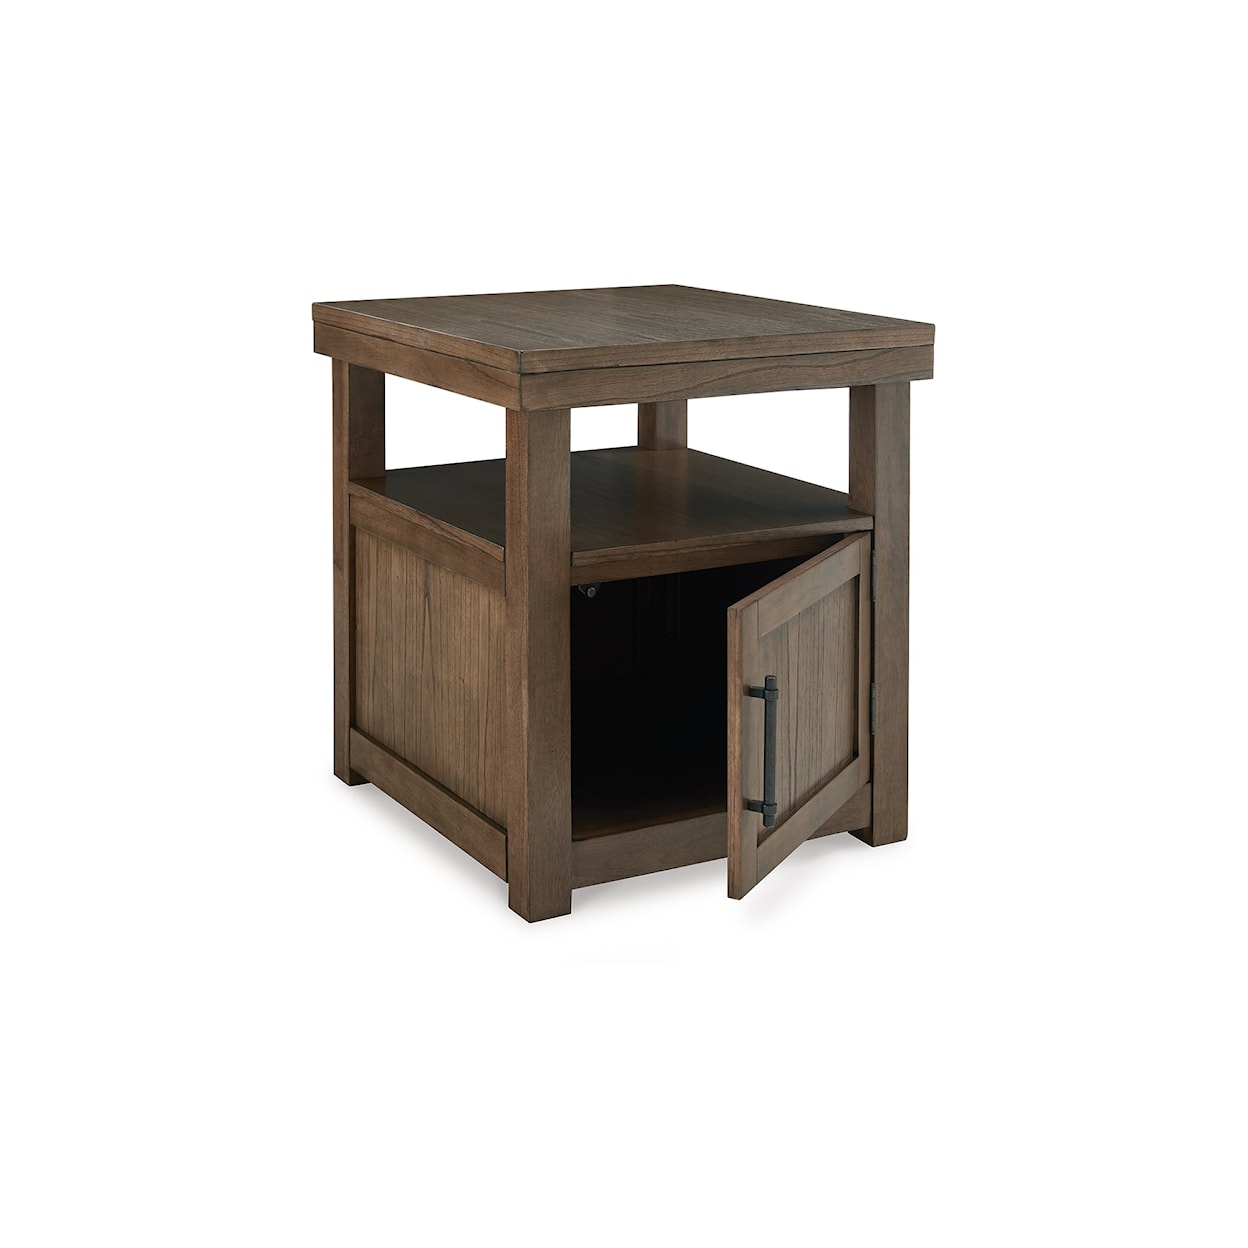 Signature Design by Ashley Boardernest Rectangular End Table